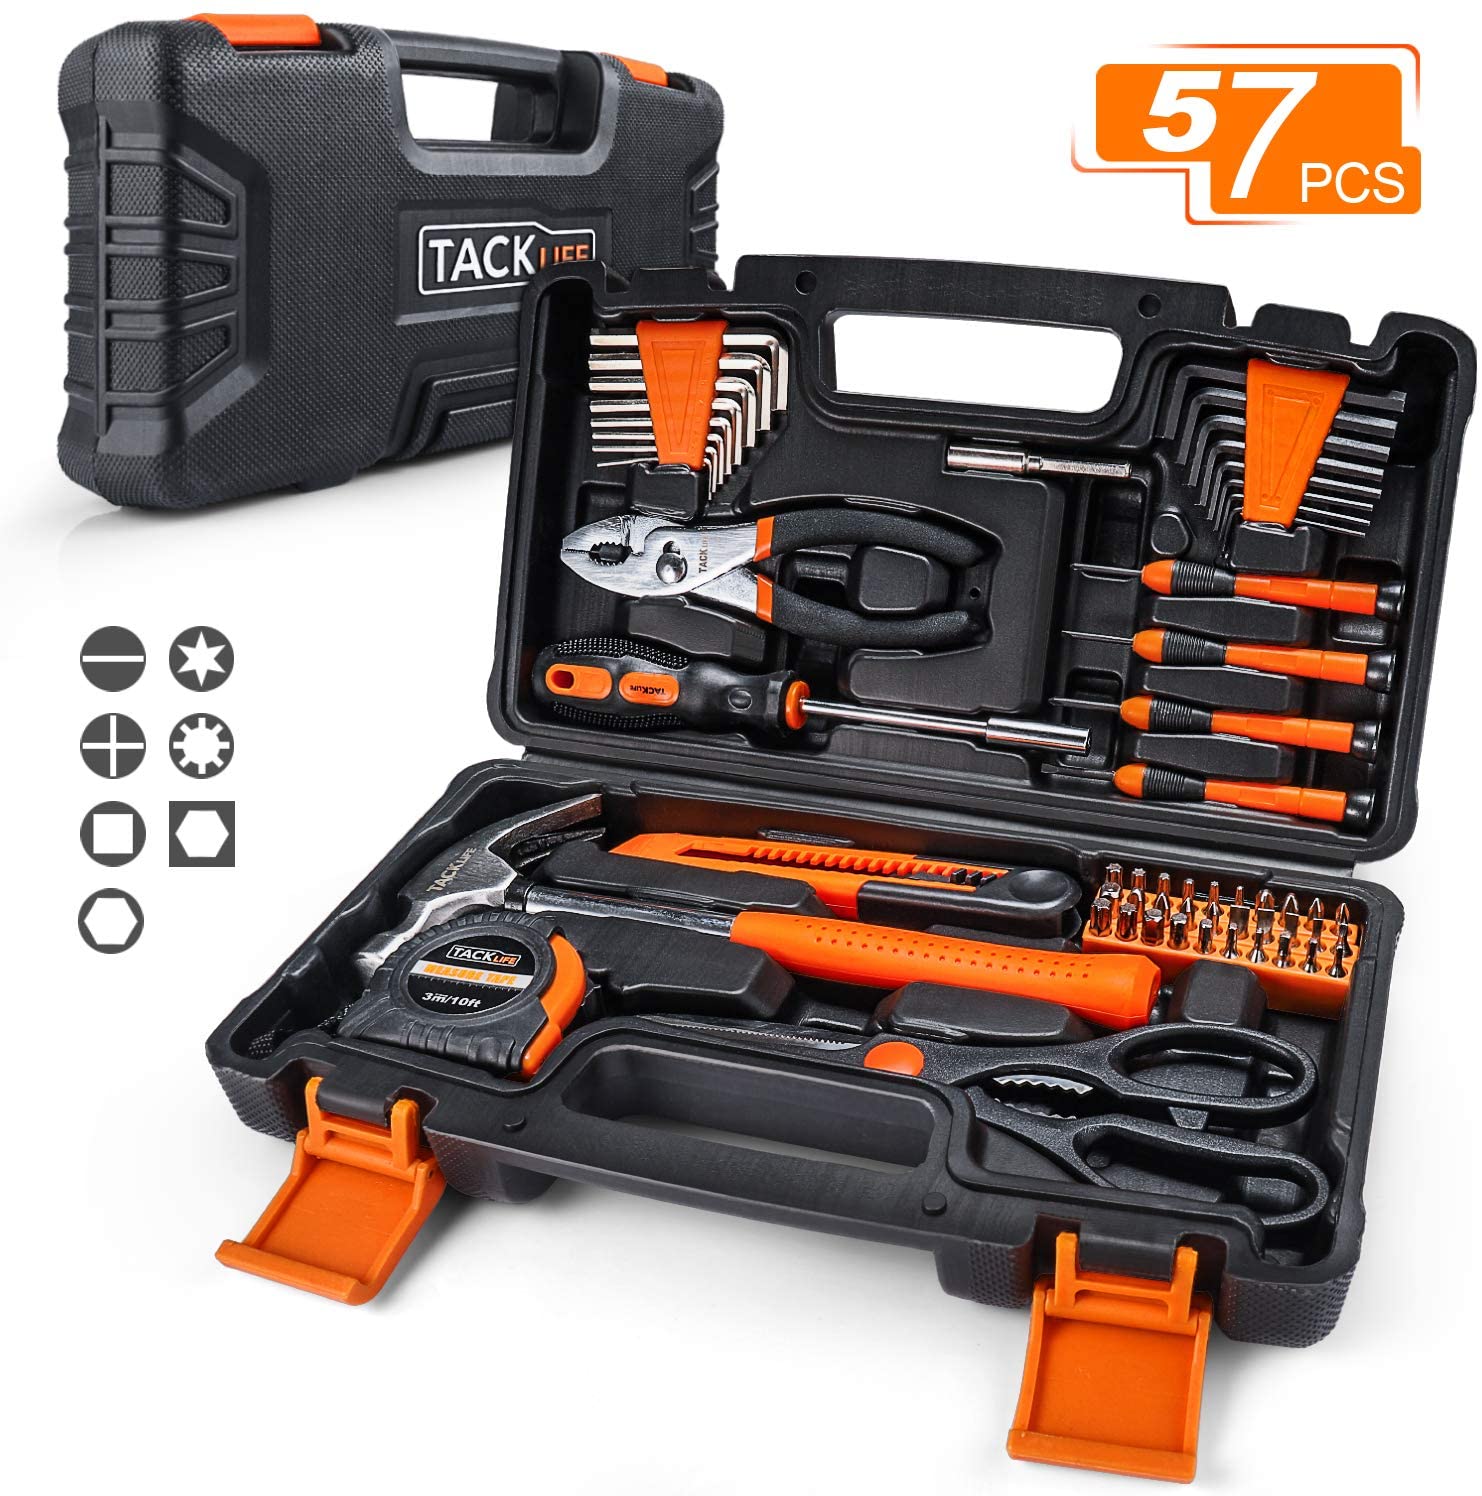 TACKLIFE 57-Piece Household Tool Kit - General Home Tool Kit with Storage Case-HHK3A